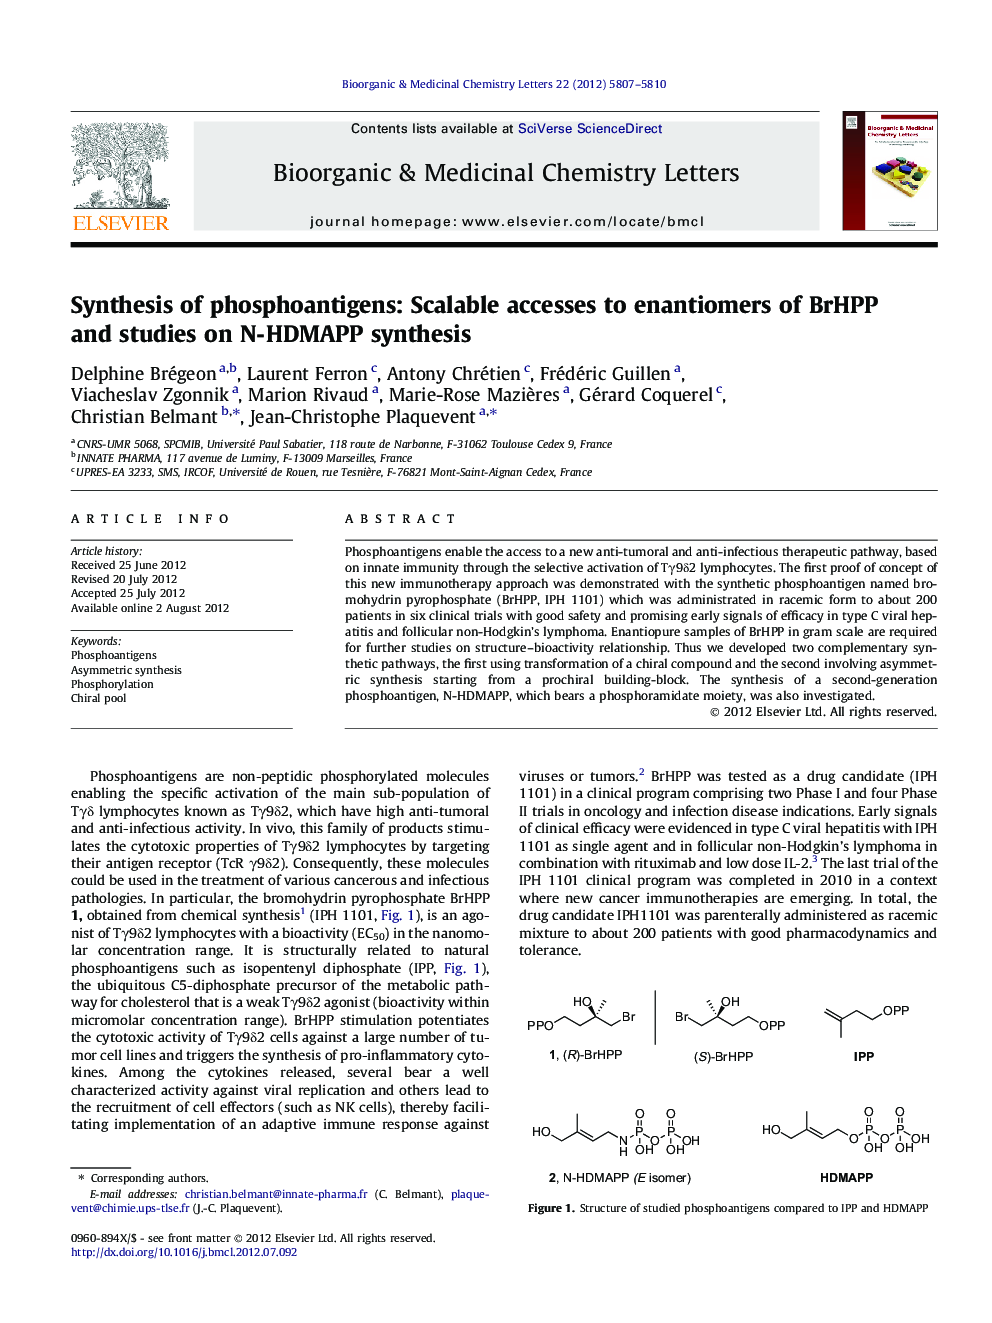 Synthesis of phosphoantigens: Scalable accesses to enantiomers of BrHPP and studies on N-HDMAPP synthesis